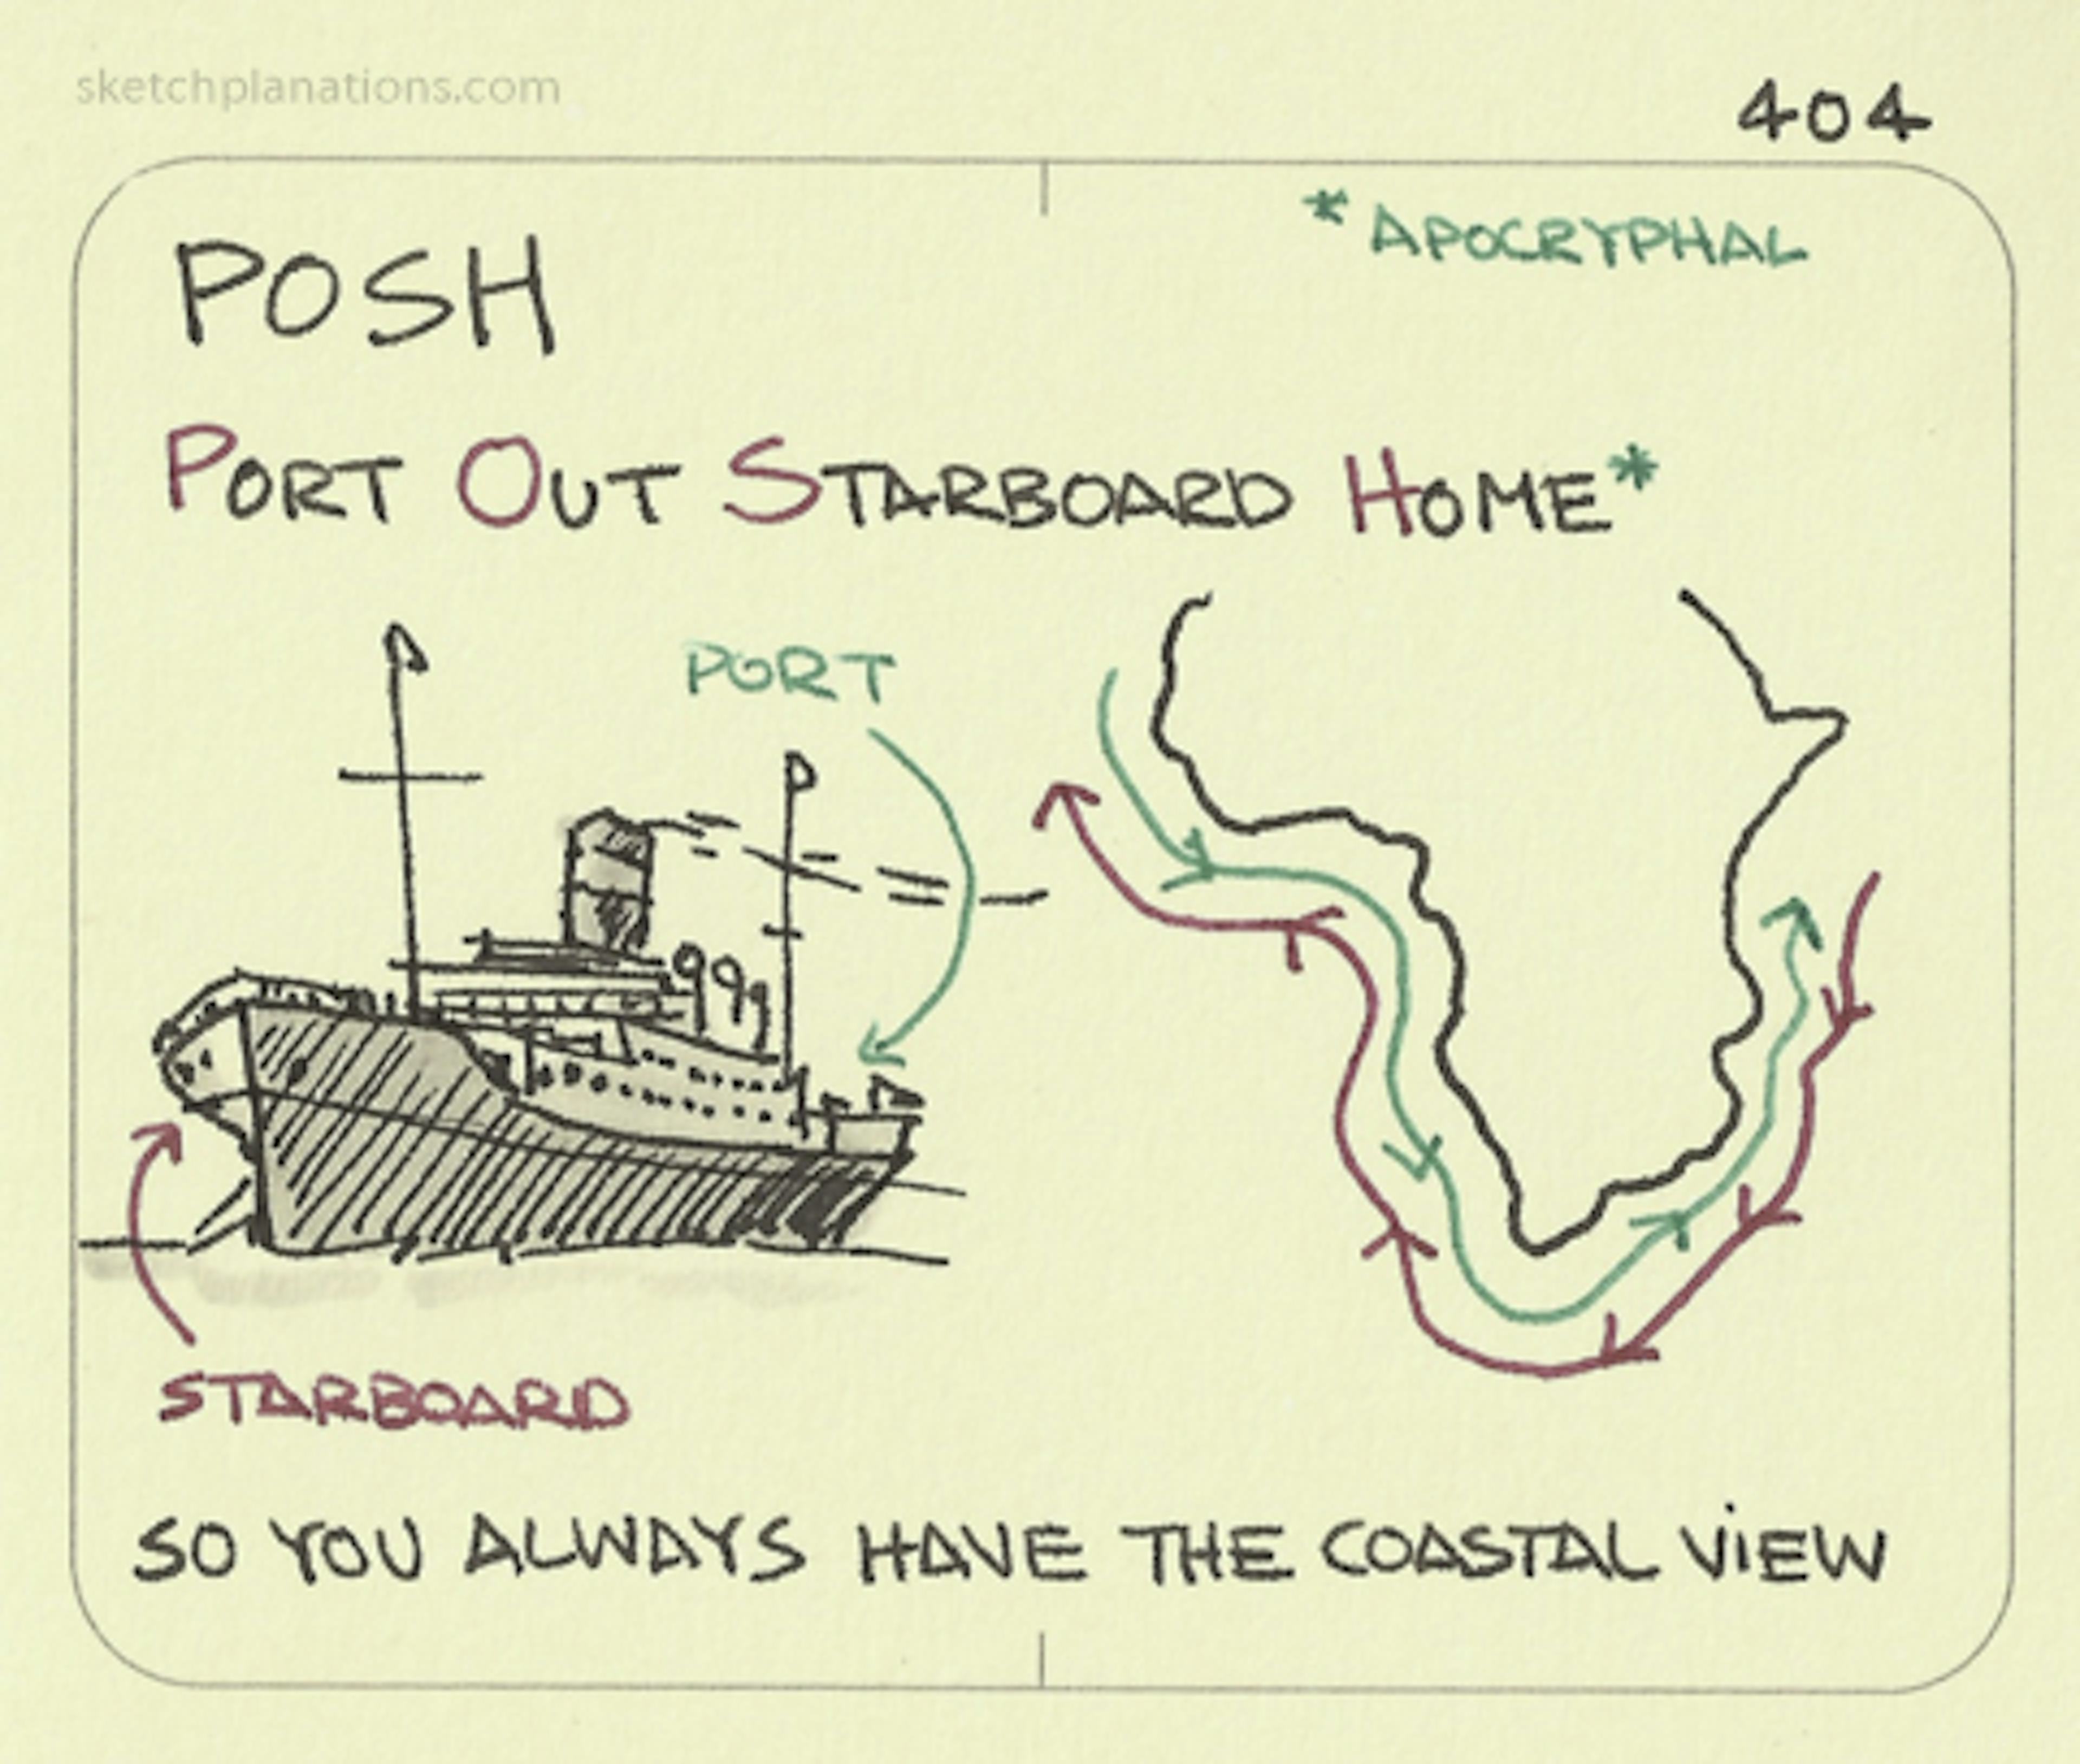 POSH: Port Out Starboard Home (apocryphal) - Sketchplanations